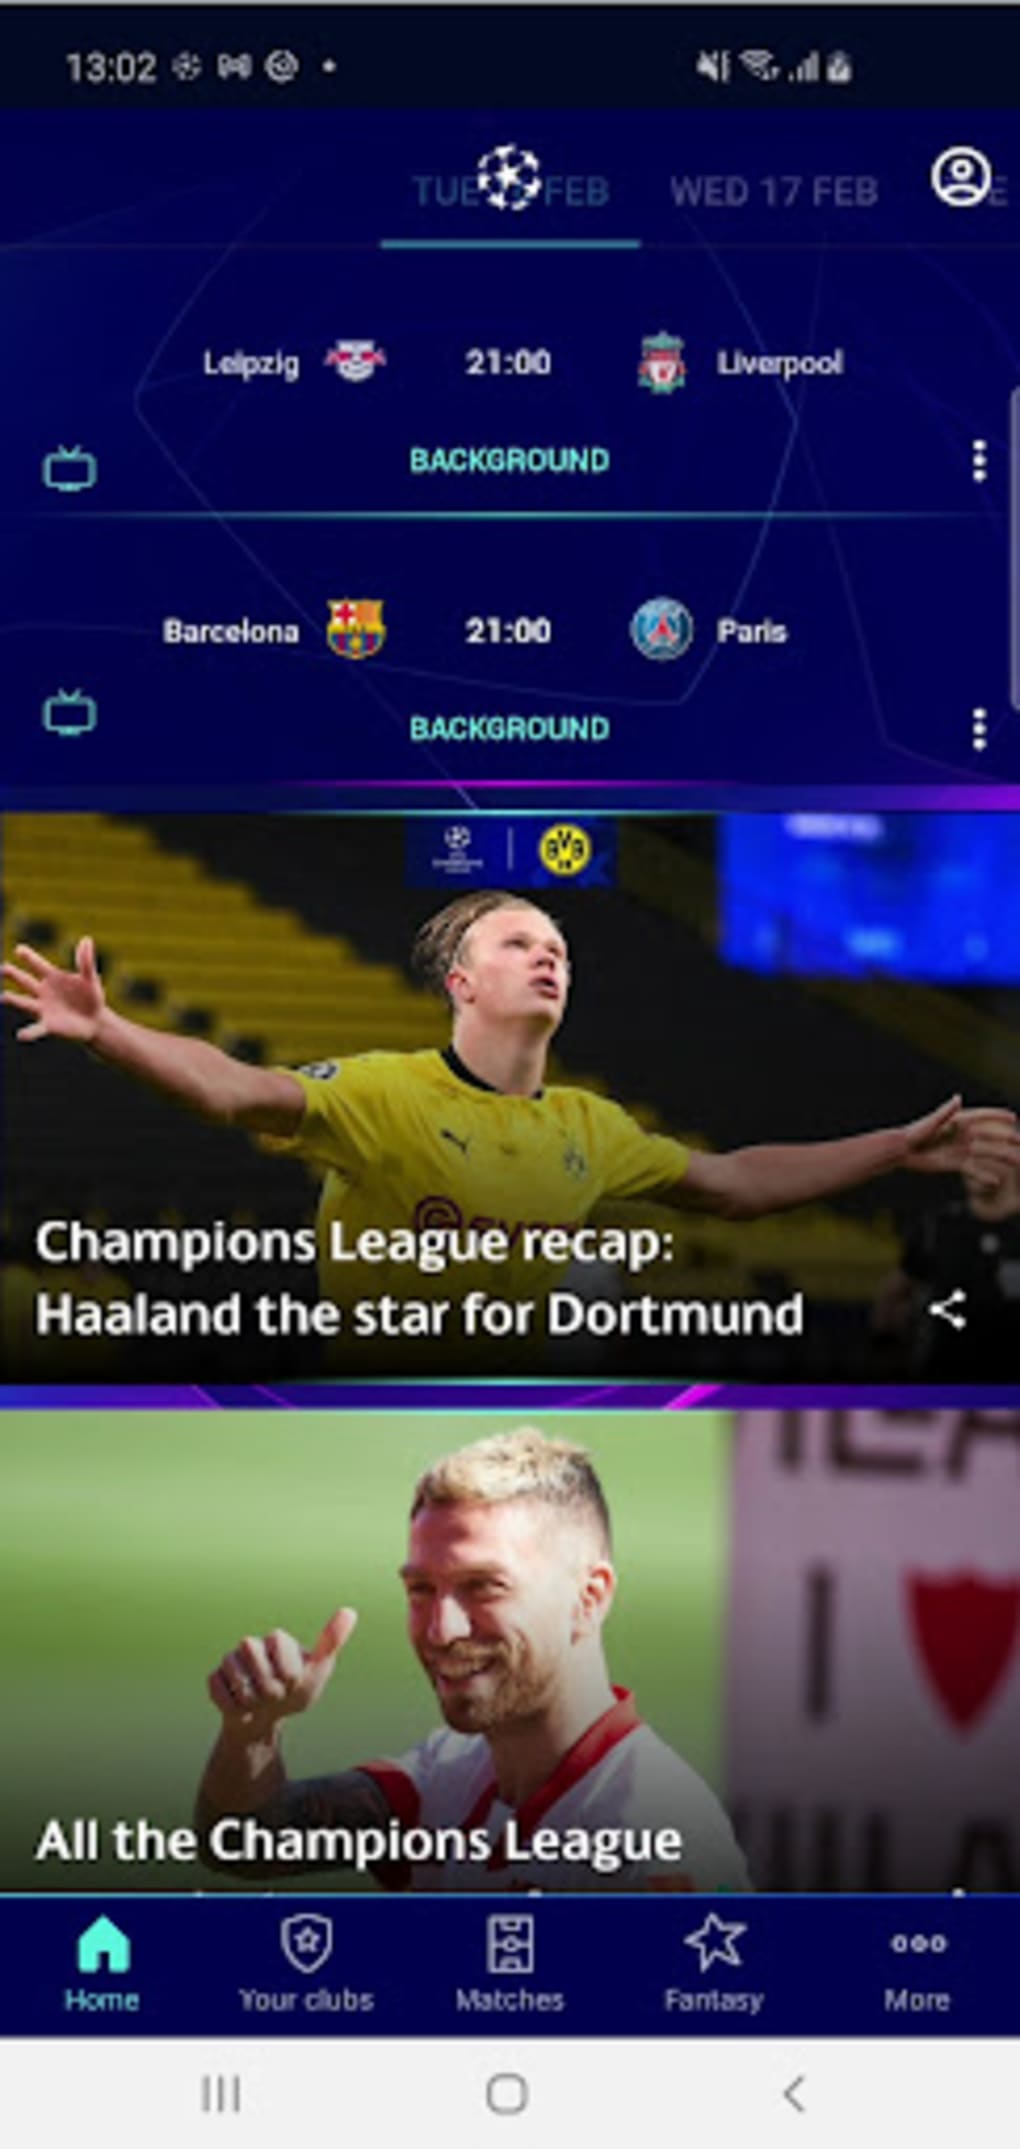 UEFA CL PES FLiCK APK Download for Android Free